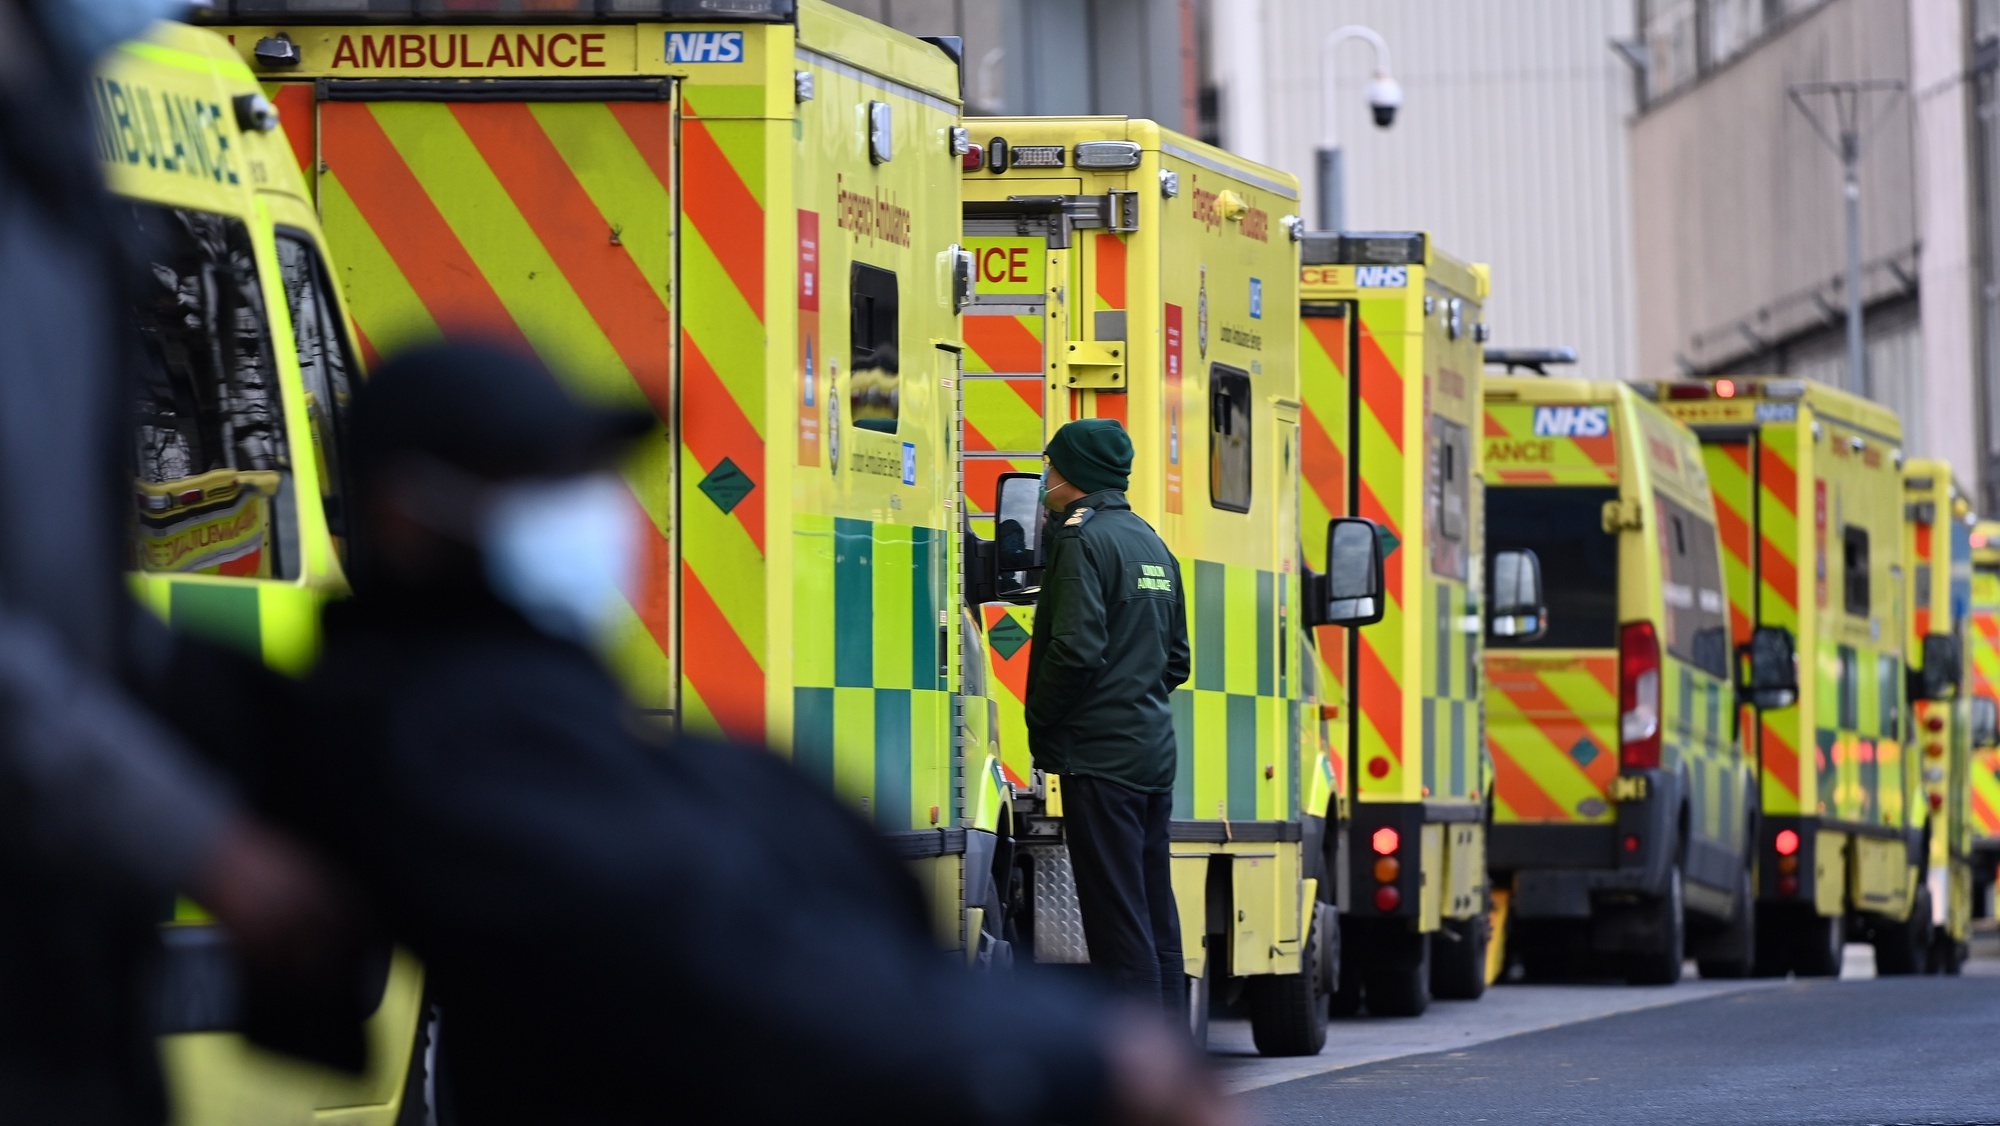 epa08922685 Ambulances outside a hospital in London, Britain, 06 January 2021. Britain&#039;s national health service (NHS) is coming under sever pressure as Covid-19 hospital admissions continue to rise across the UK.  EPA/ANDY RAIN